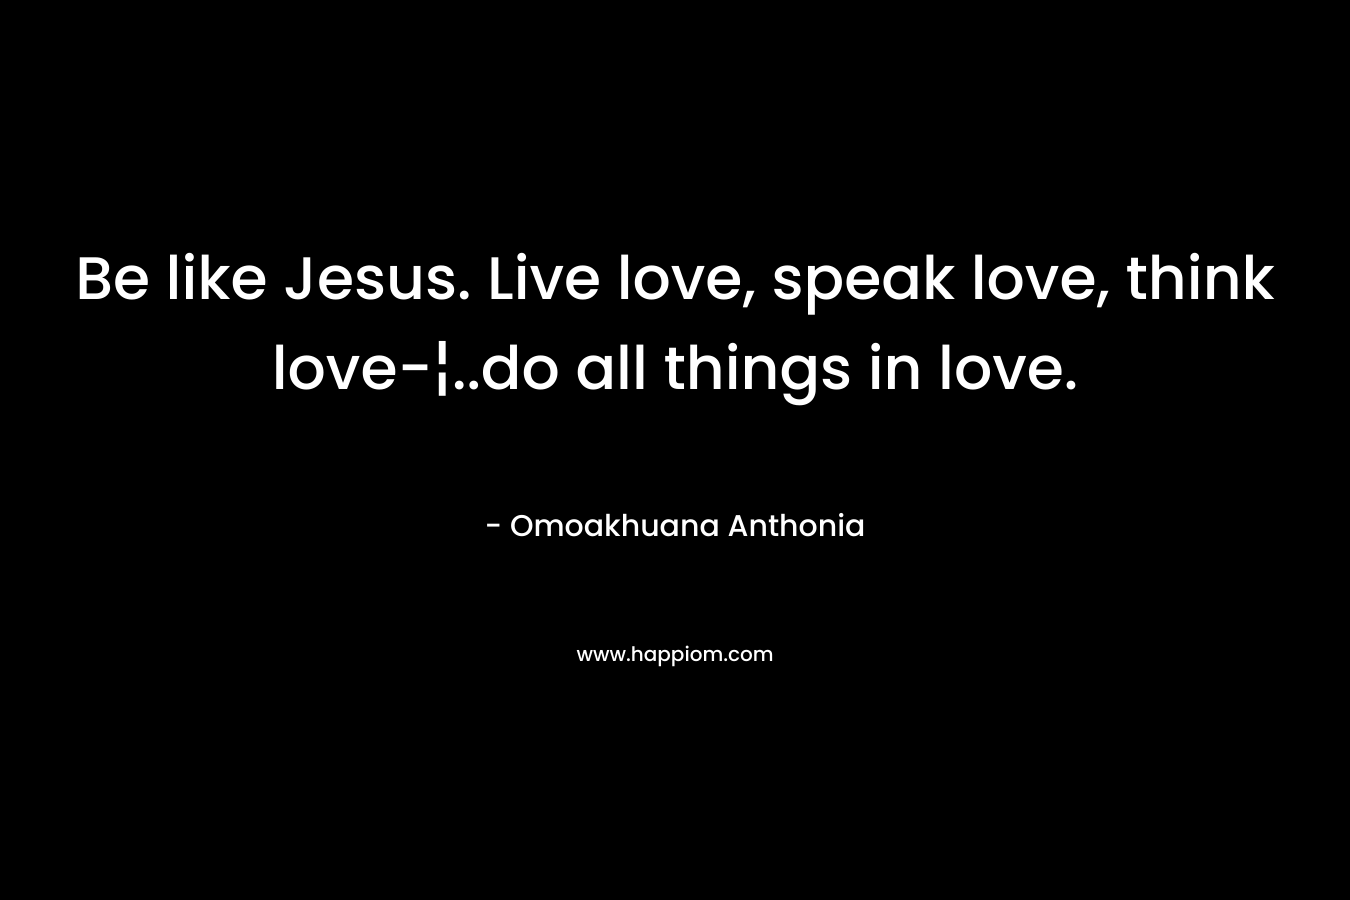 Be like Jesus. Live love, speak love, think love-¦..do all things in love. – Omoakhuana Anthonia